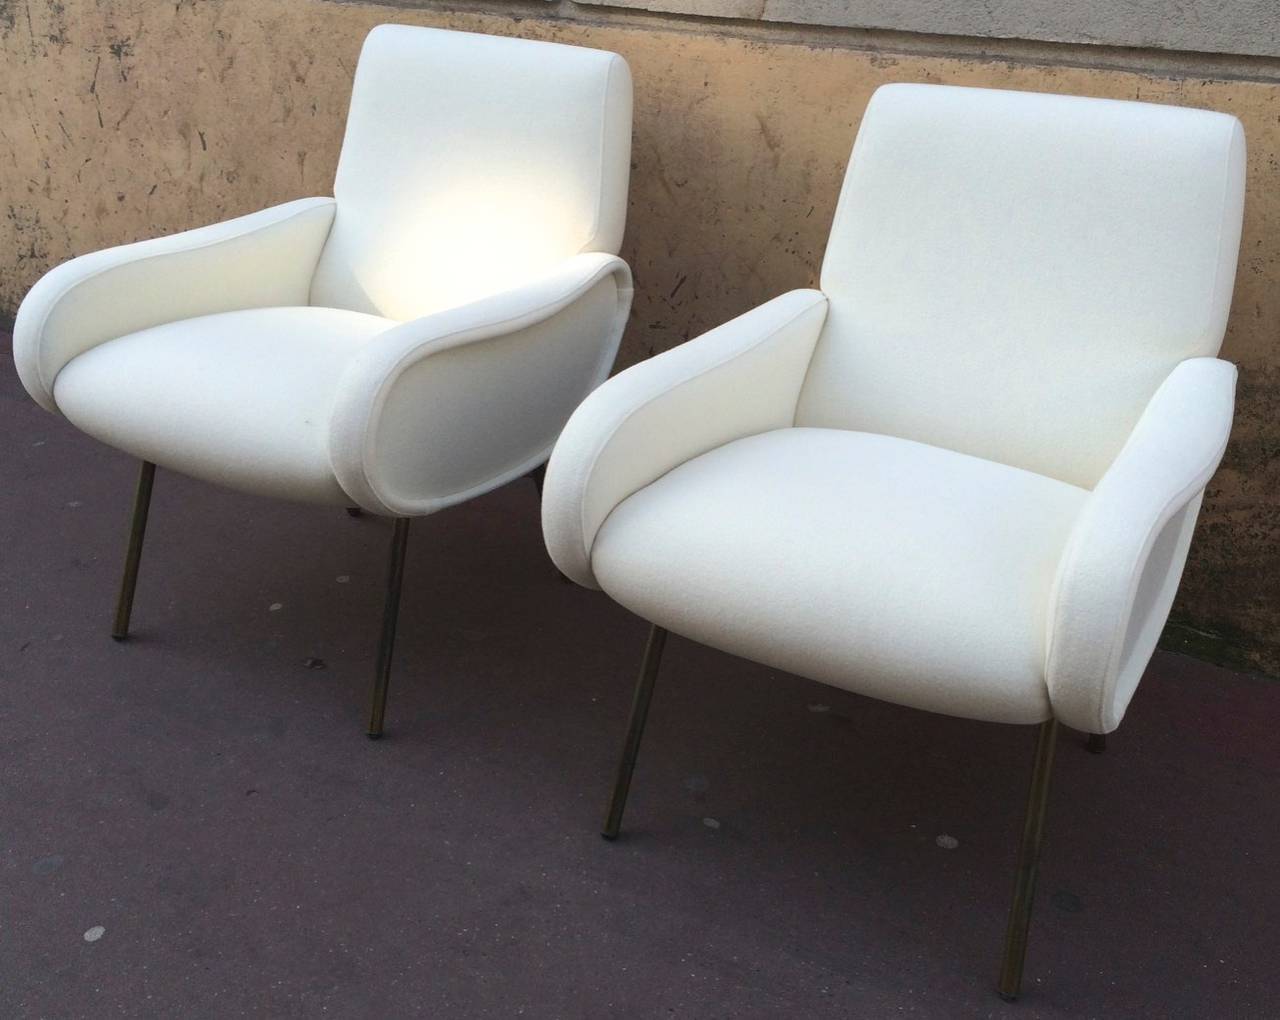 Marco Zanuso pair of vintage model lady high seat version recovered in raw white Kvadrat.